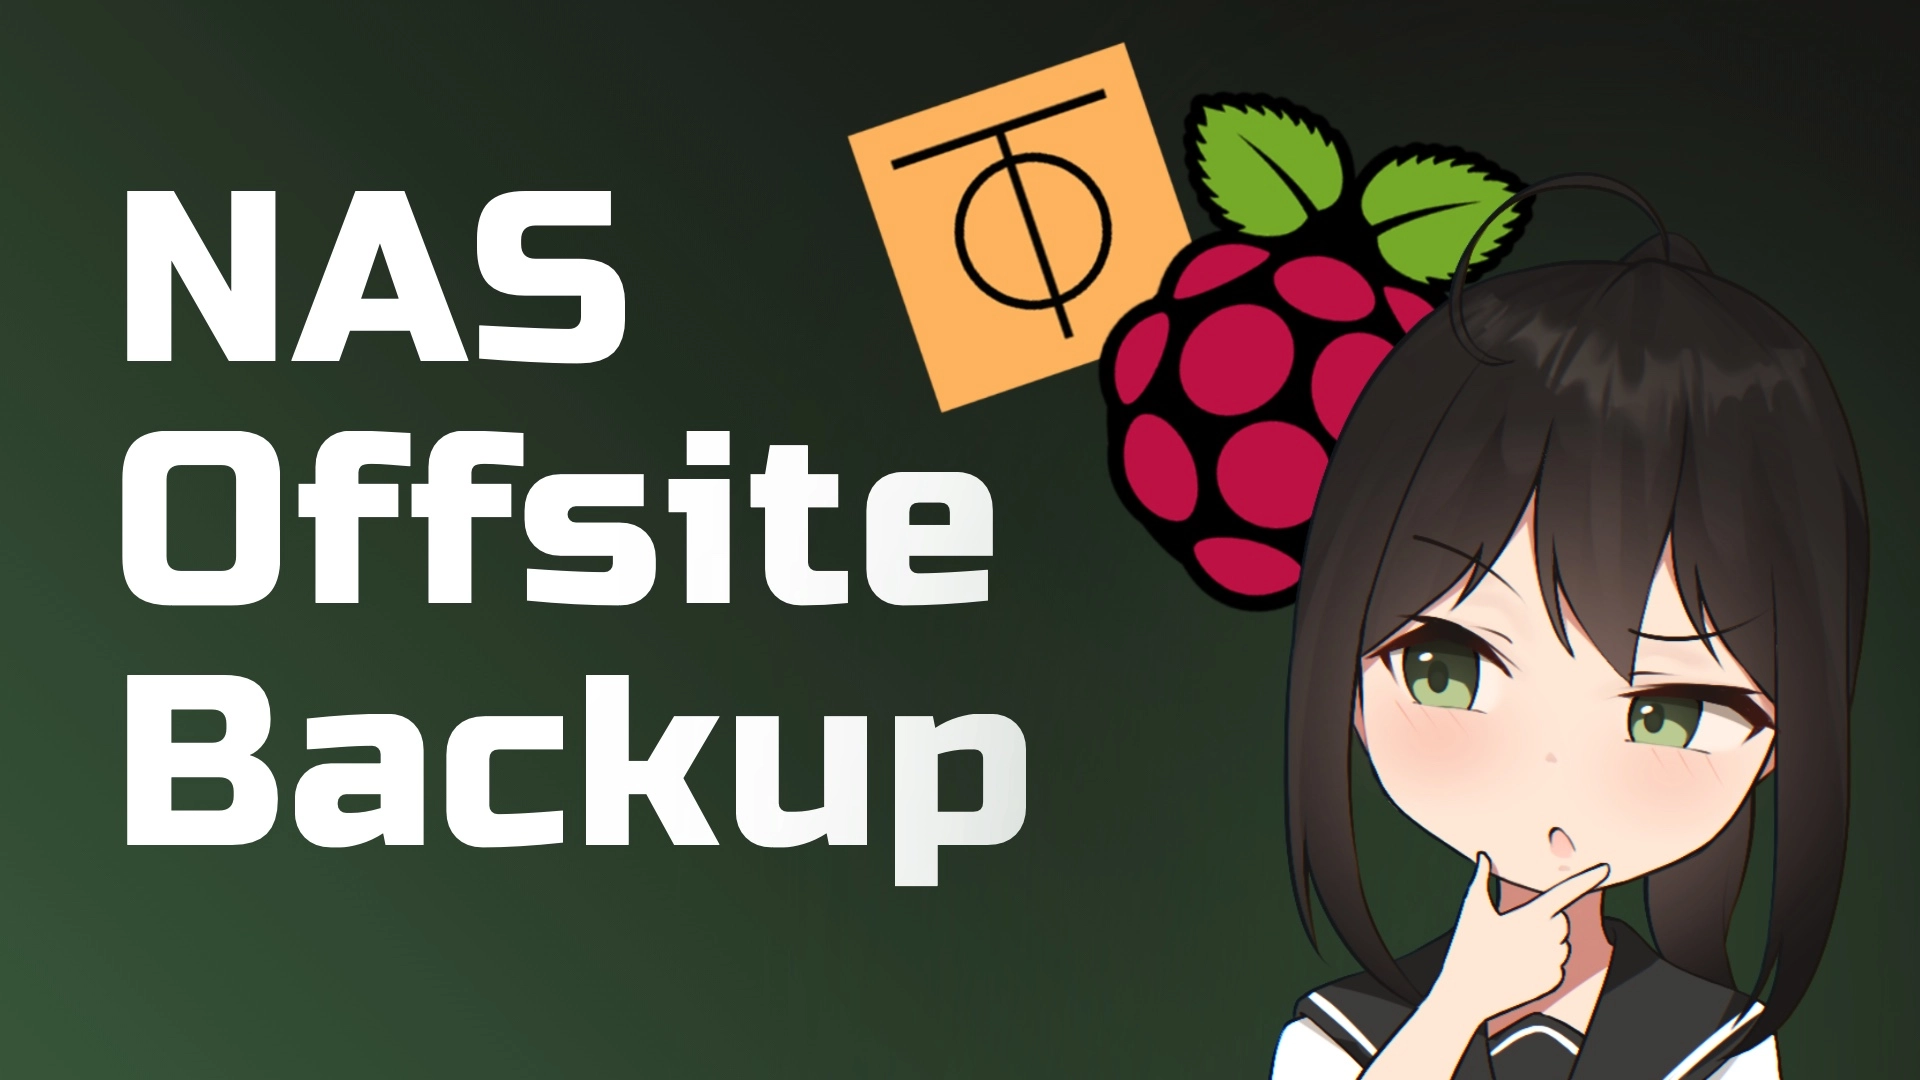 NAS Offsite Backup by Raspberry Pi and ZeroTier